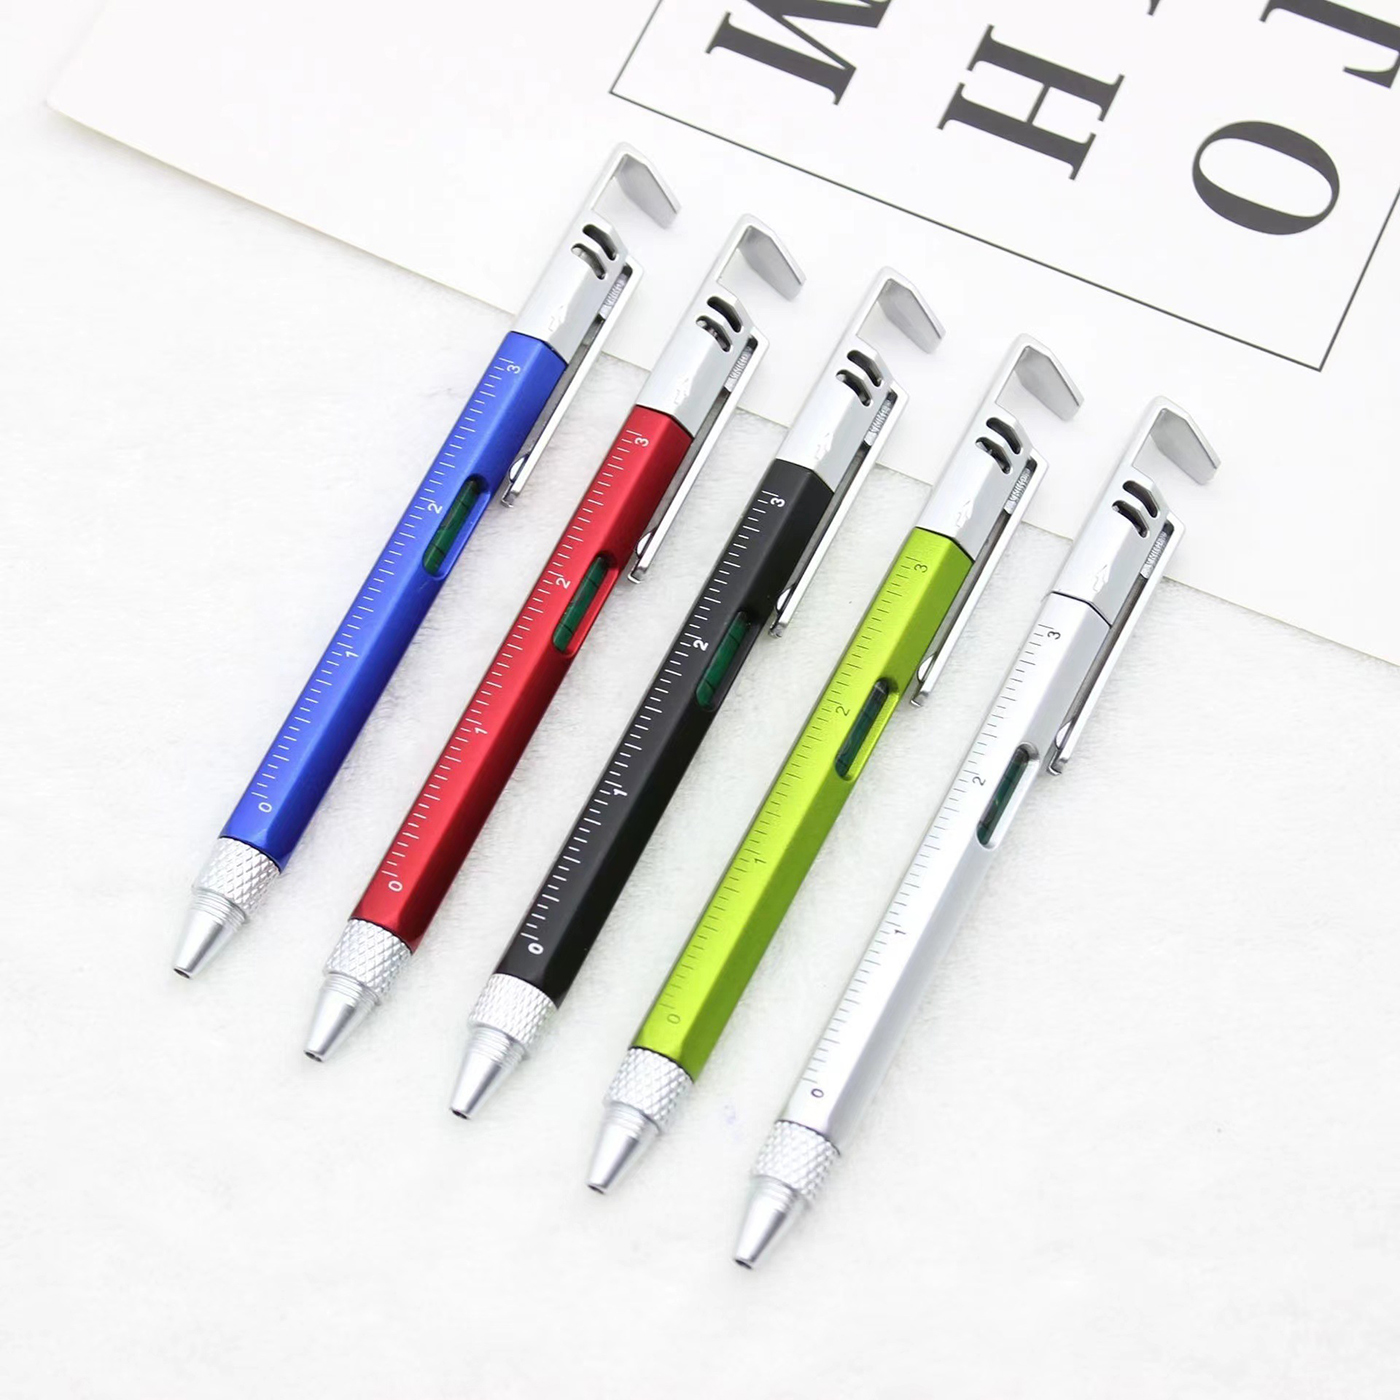 Multifunction Tool Pen With Phone Holder